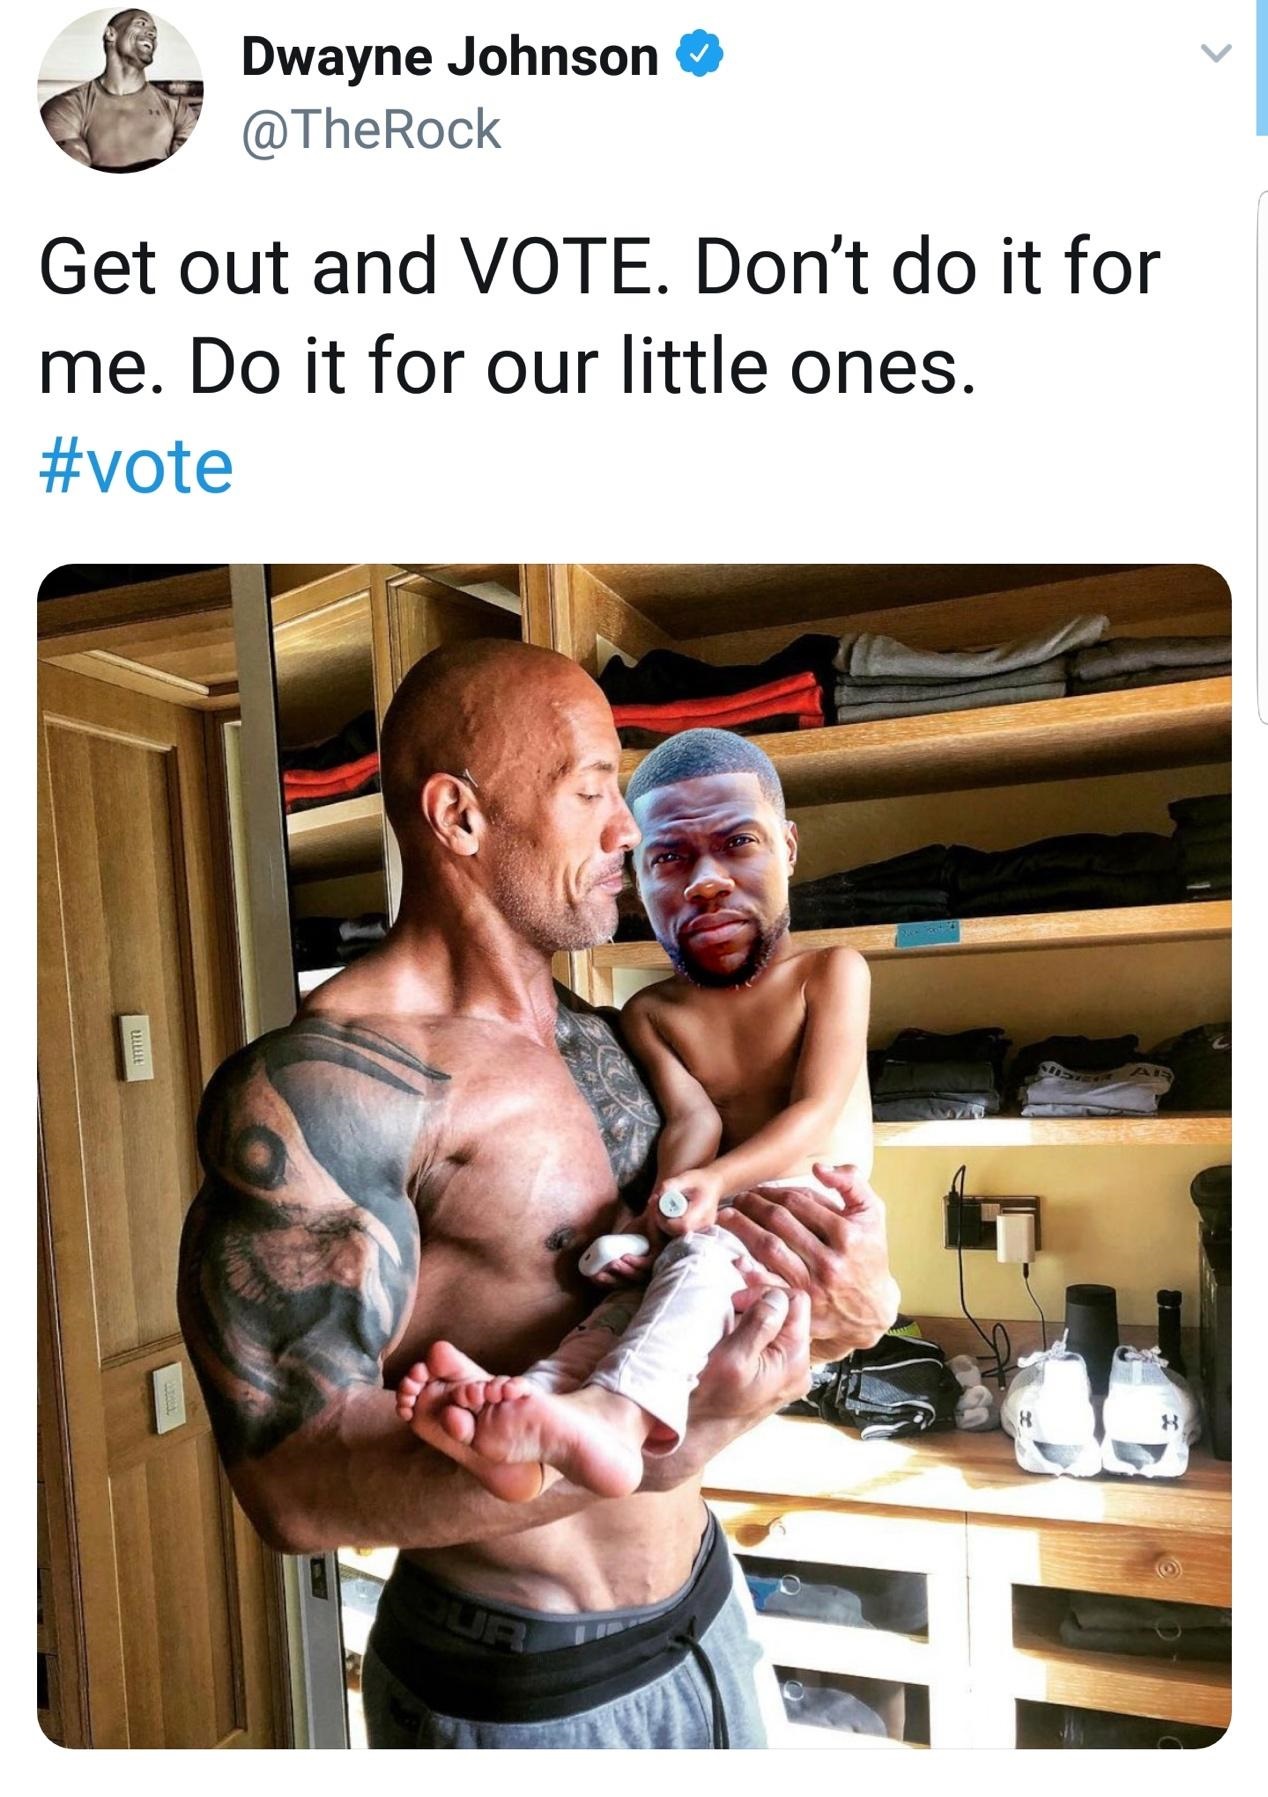 funny tweets - dwayne johnson kevin hart baby - Dwayne Johnson Get out and Vote. Don't do it for me. Do it for our little ones.